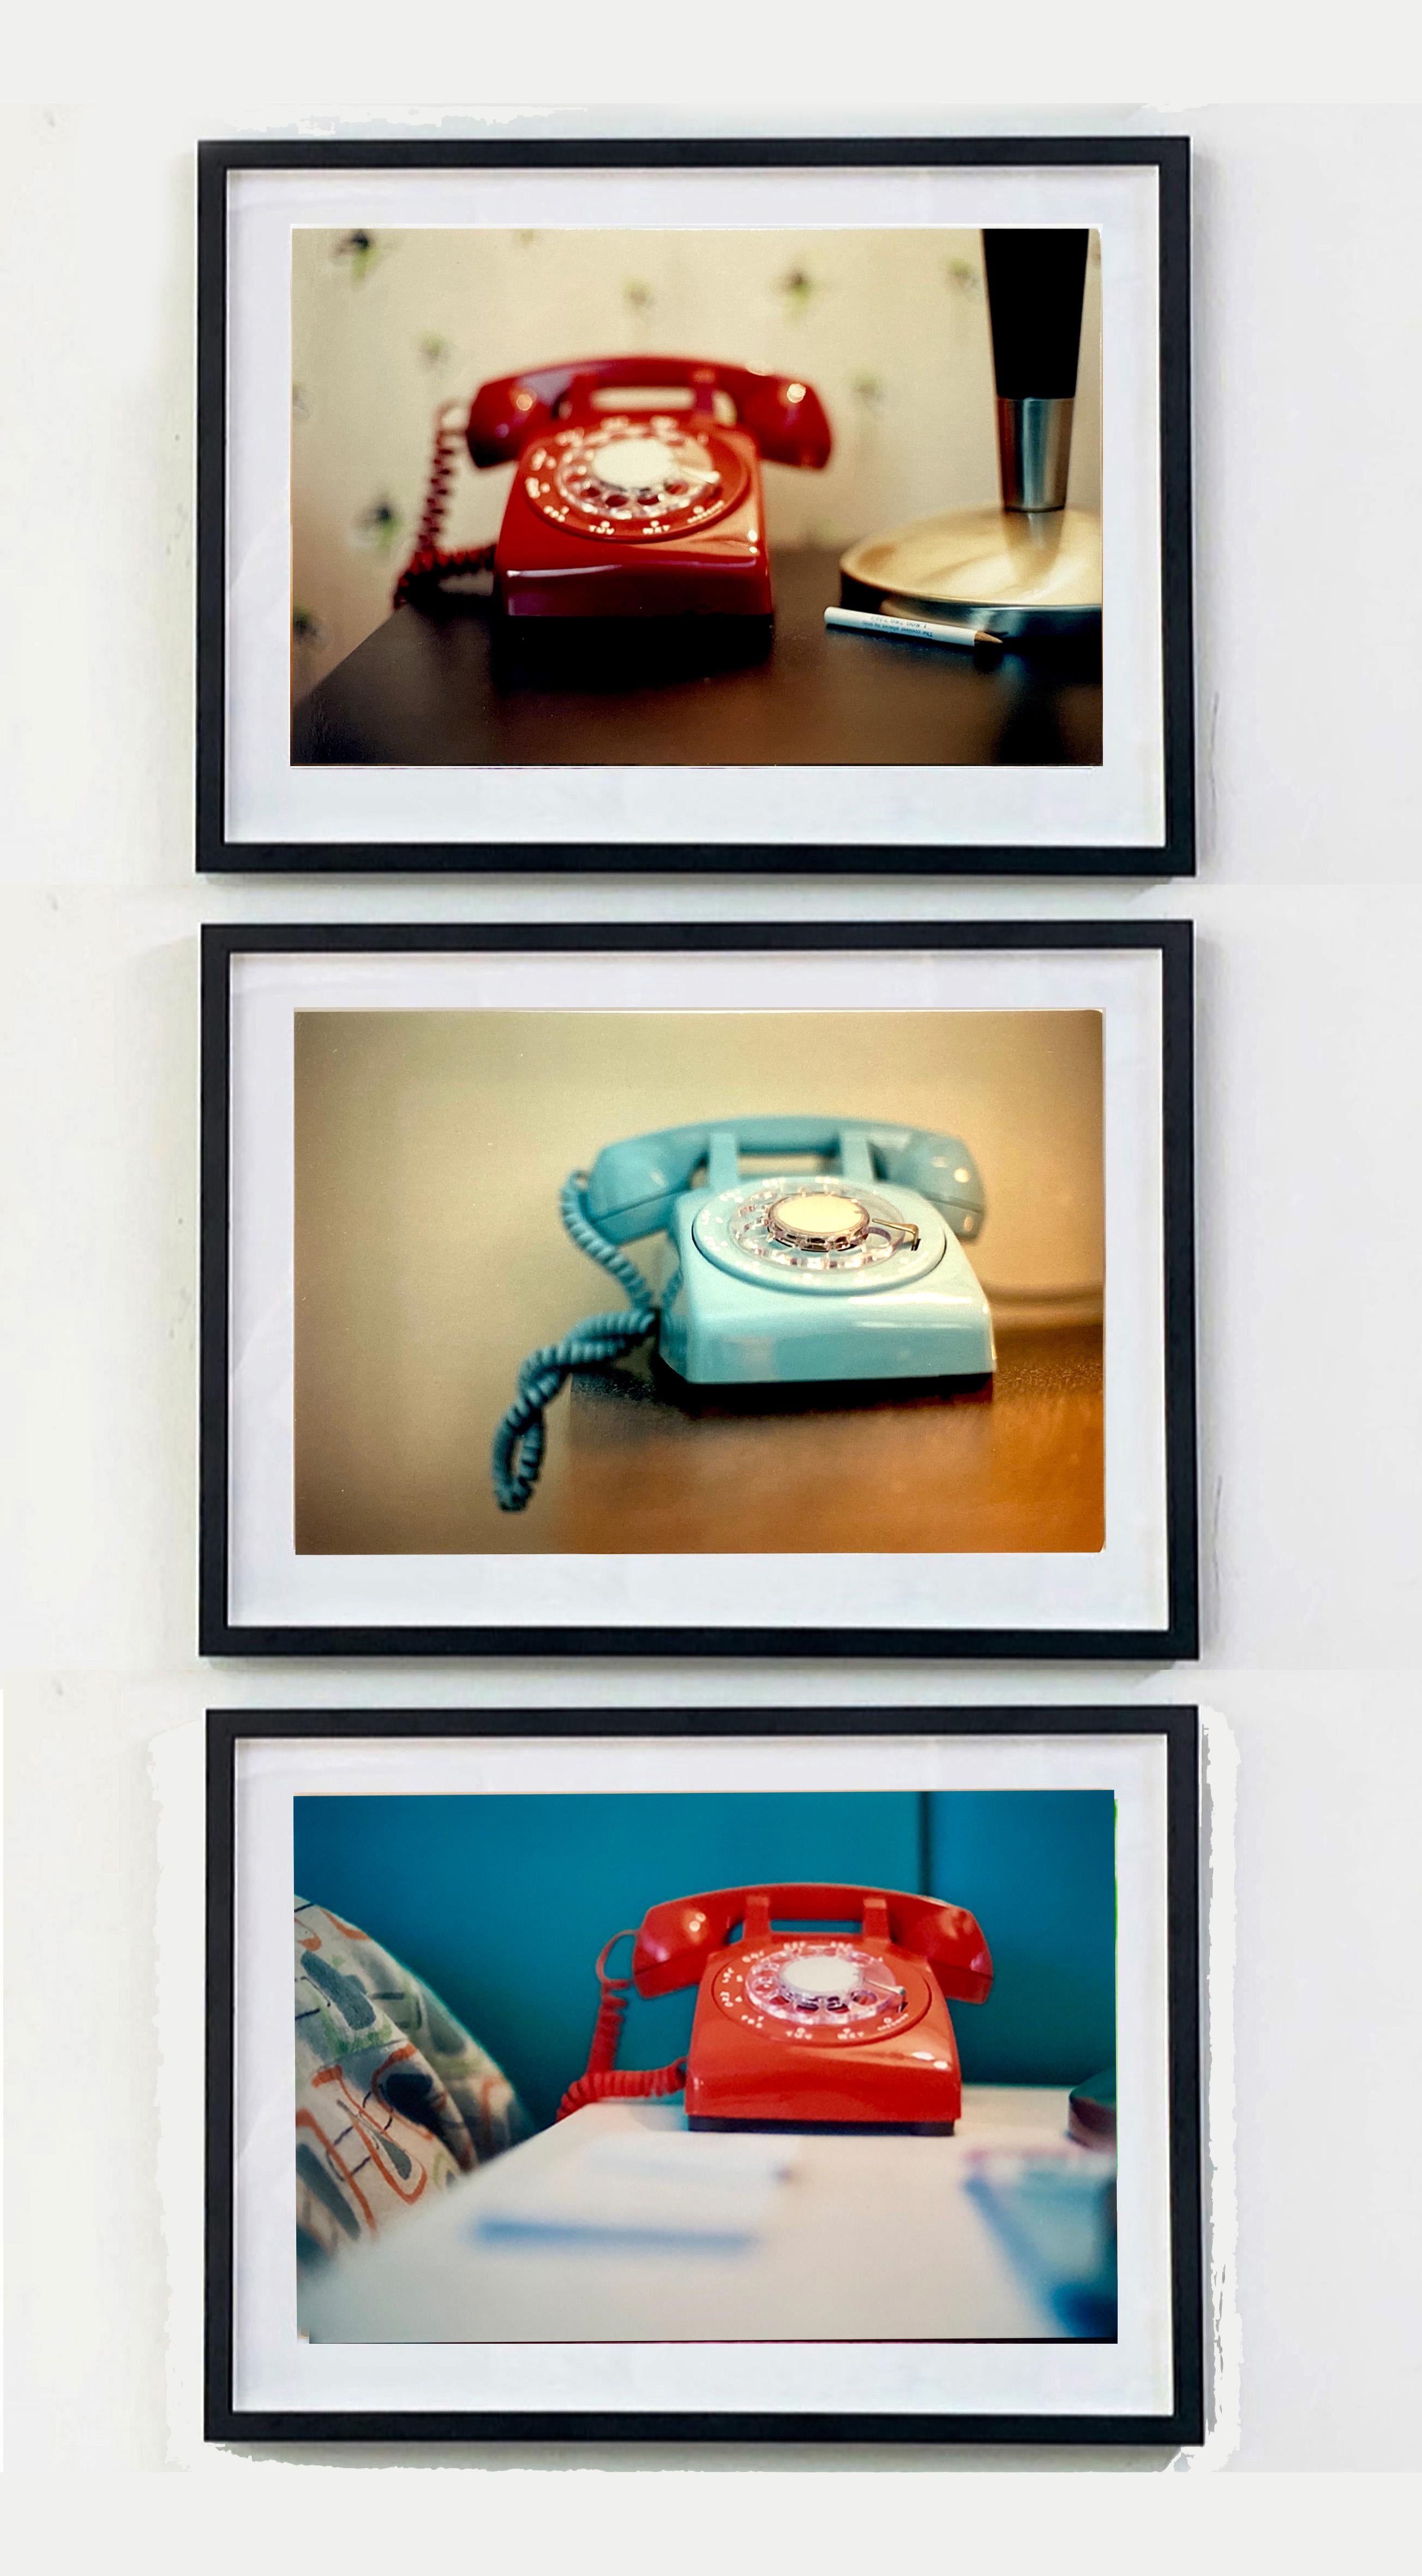 Telephone VI, Ballantines Movie Colony, Palm Springs - Interior Color Photo - Gray Color Photograph by Richard Heeps